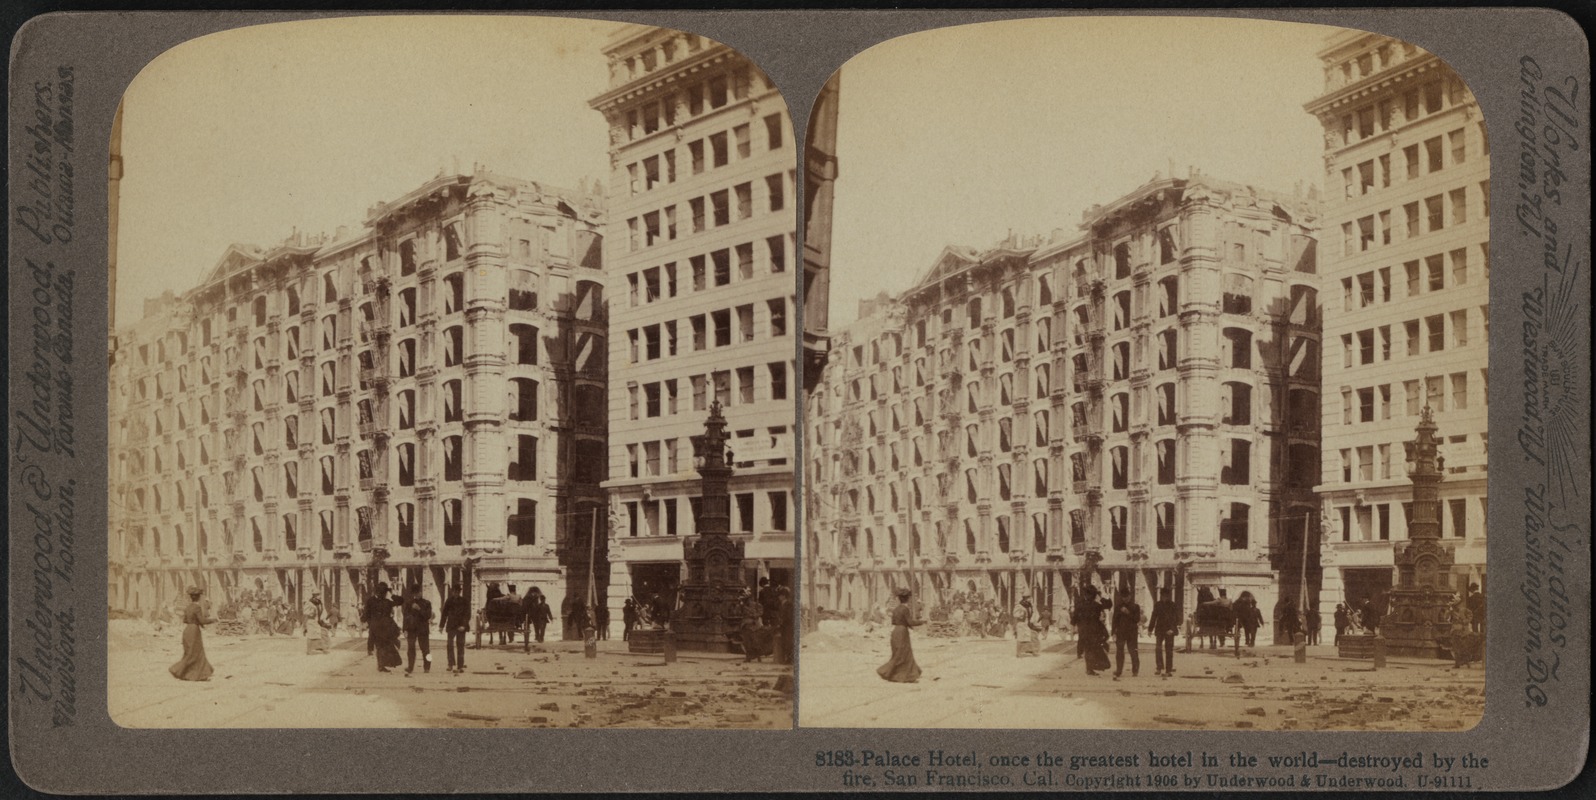 Palace Hotel, once the greatest hotel in the world -- destroyed by the fire, San Francisco, Cal.